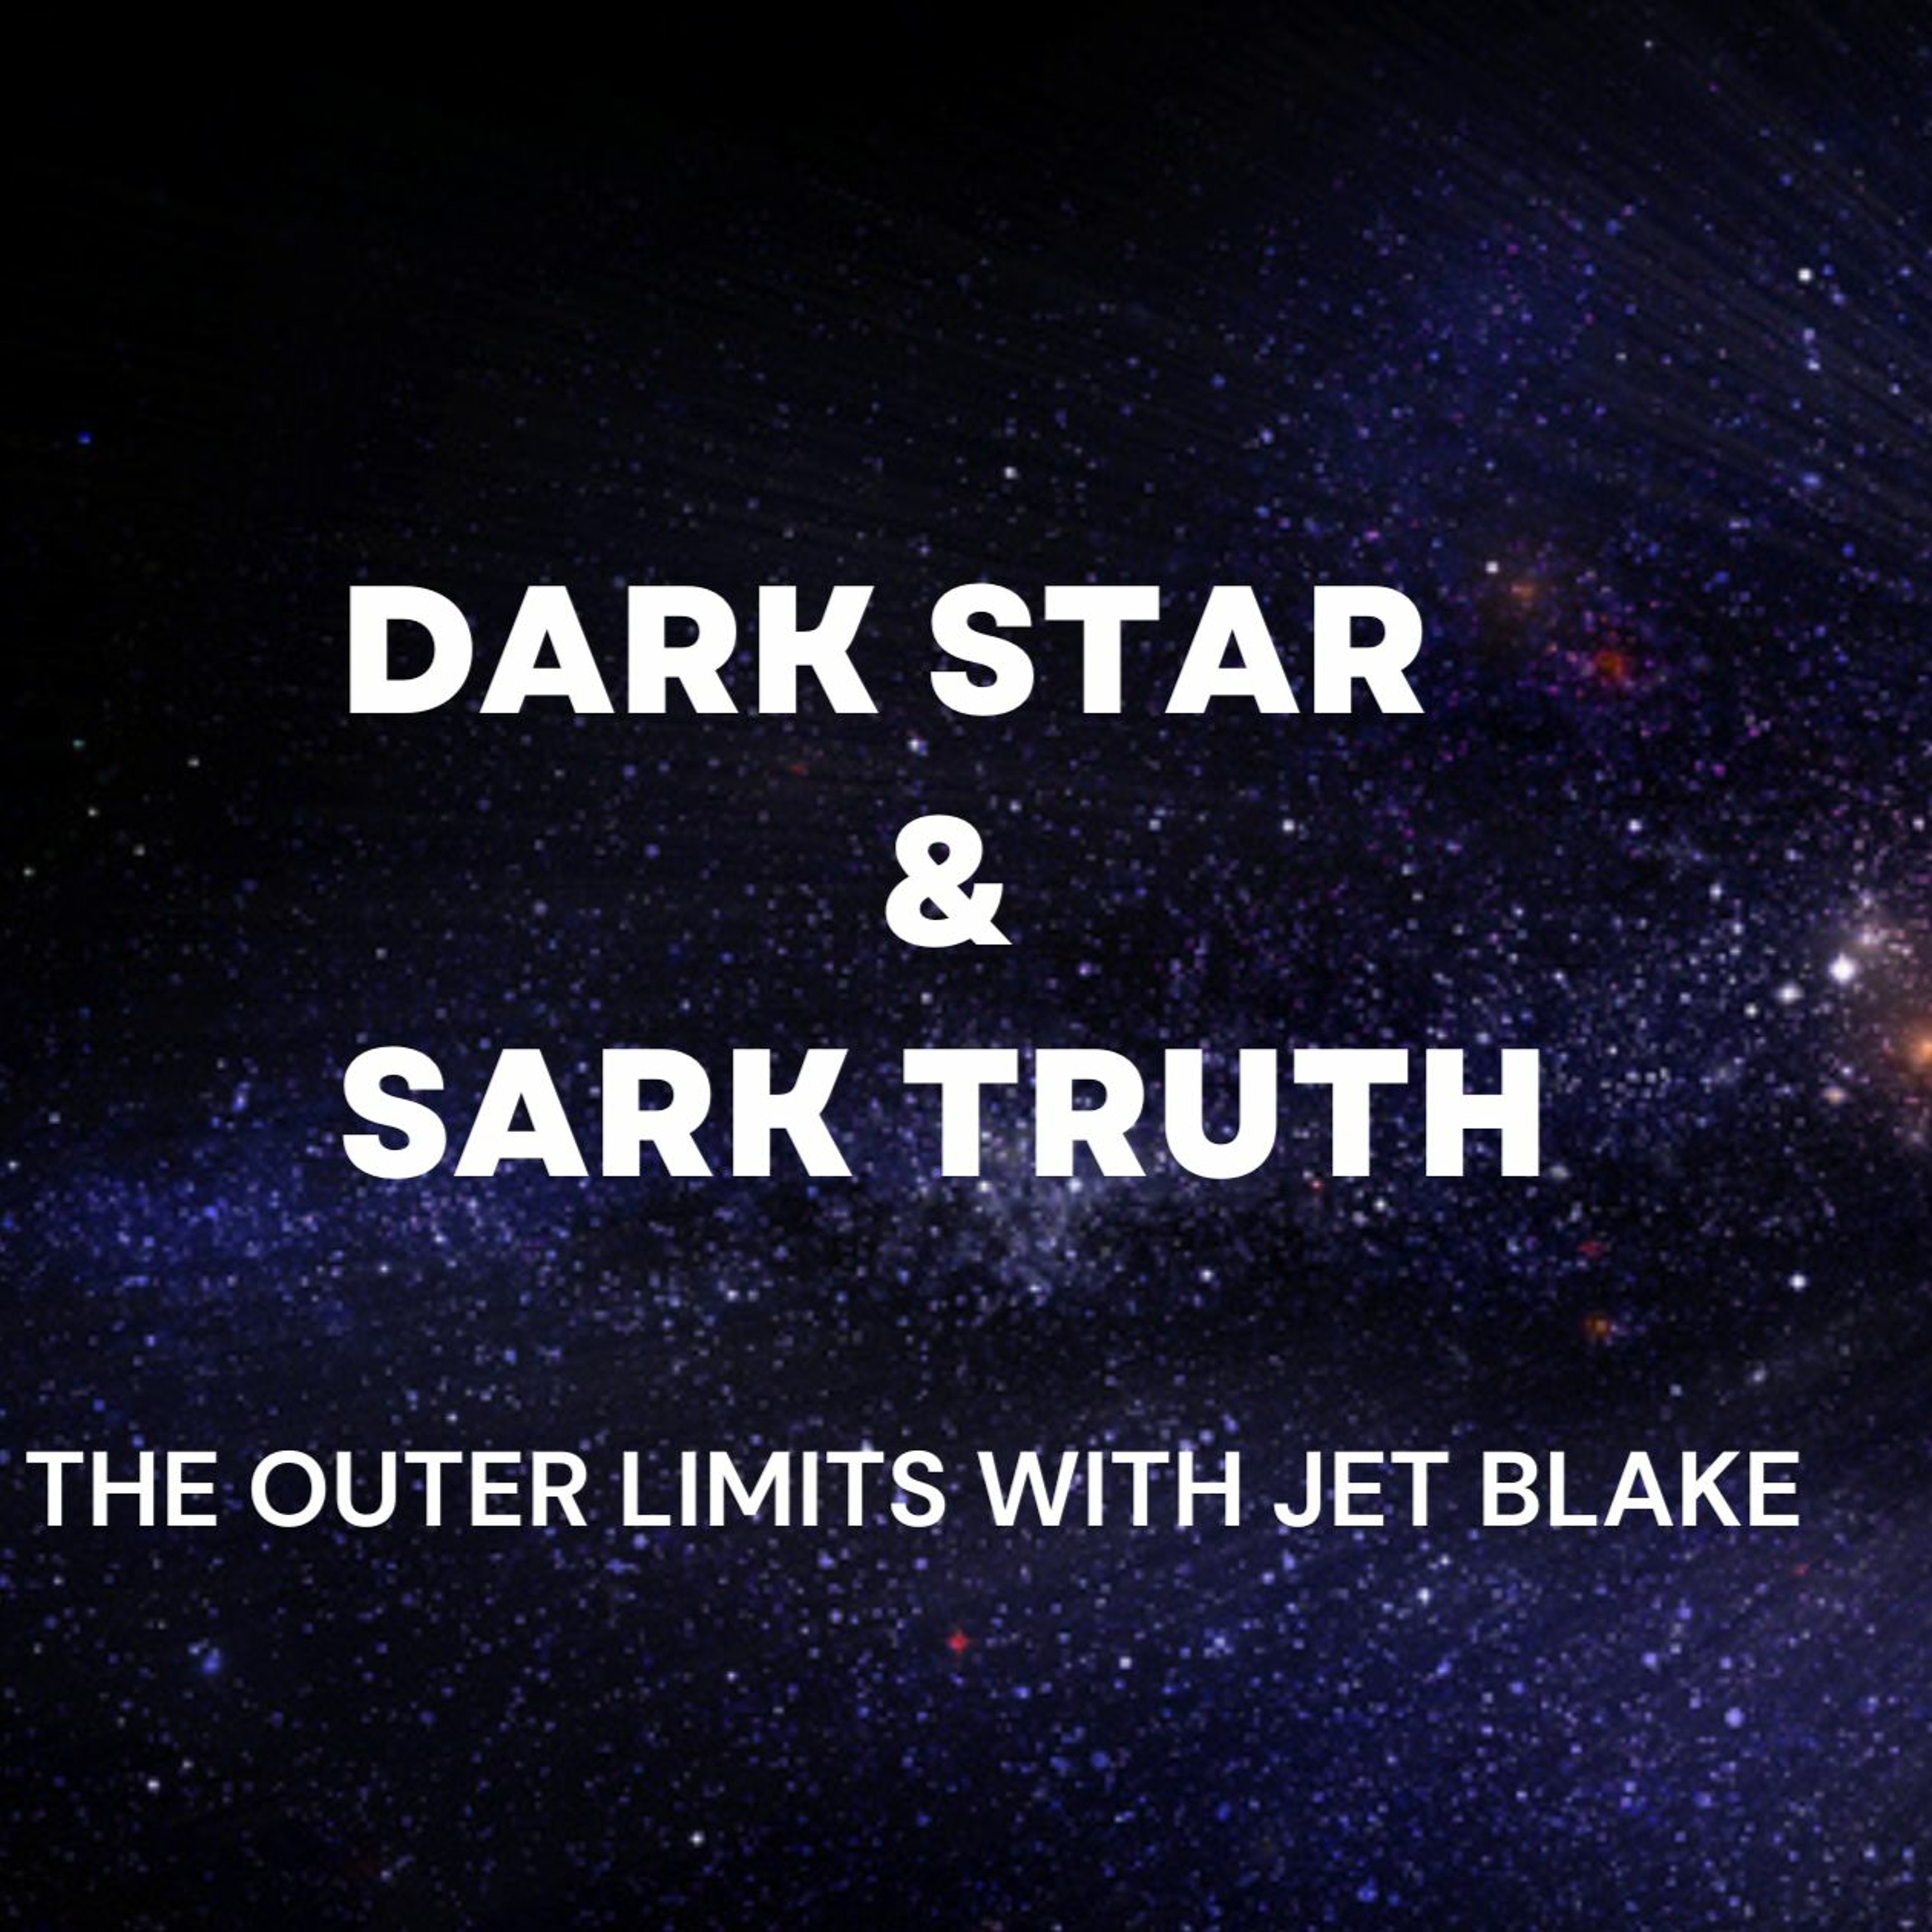 The Outer Limits: With Jet Blake. Dark Stars & Sark Truth.